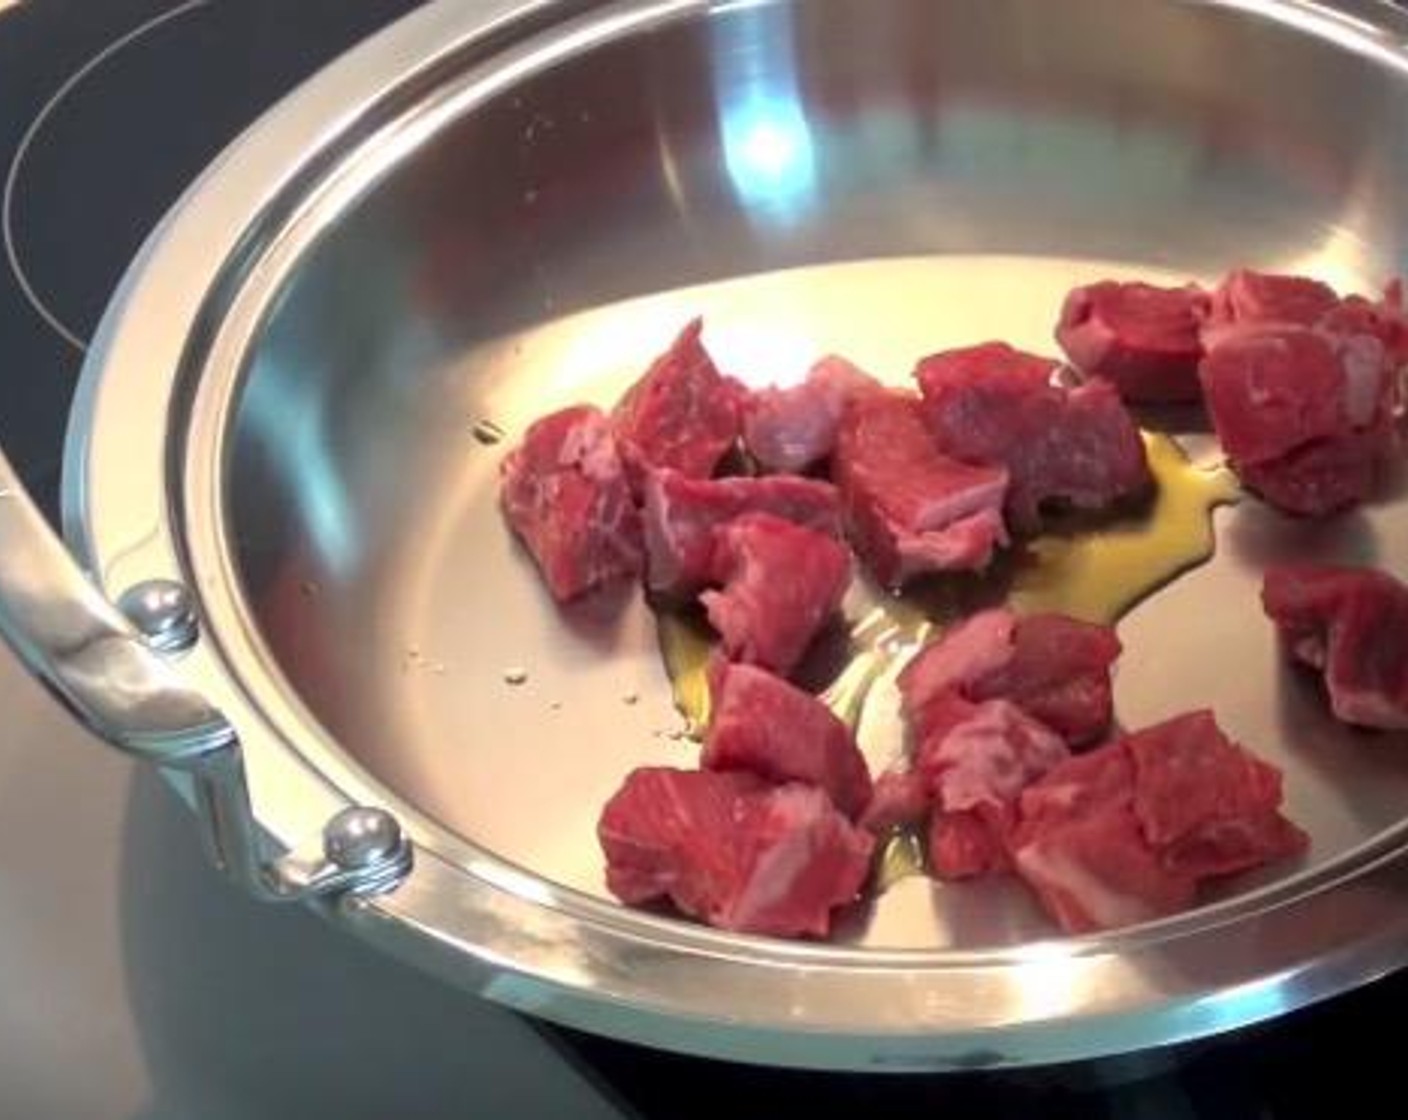 step 1 In a tagine or heavy-based saucepan, add Olive Oil (as needed). Brown Beef Chuck (1.5 lb) in batches and transfer to a bowl as finished.